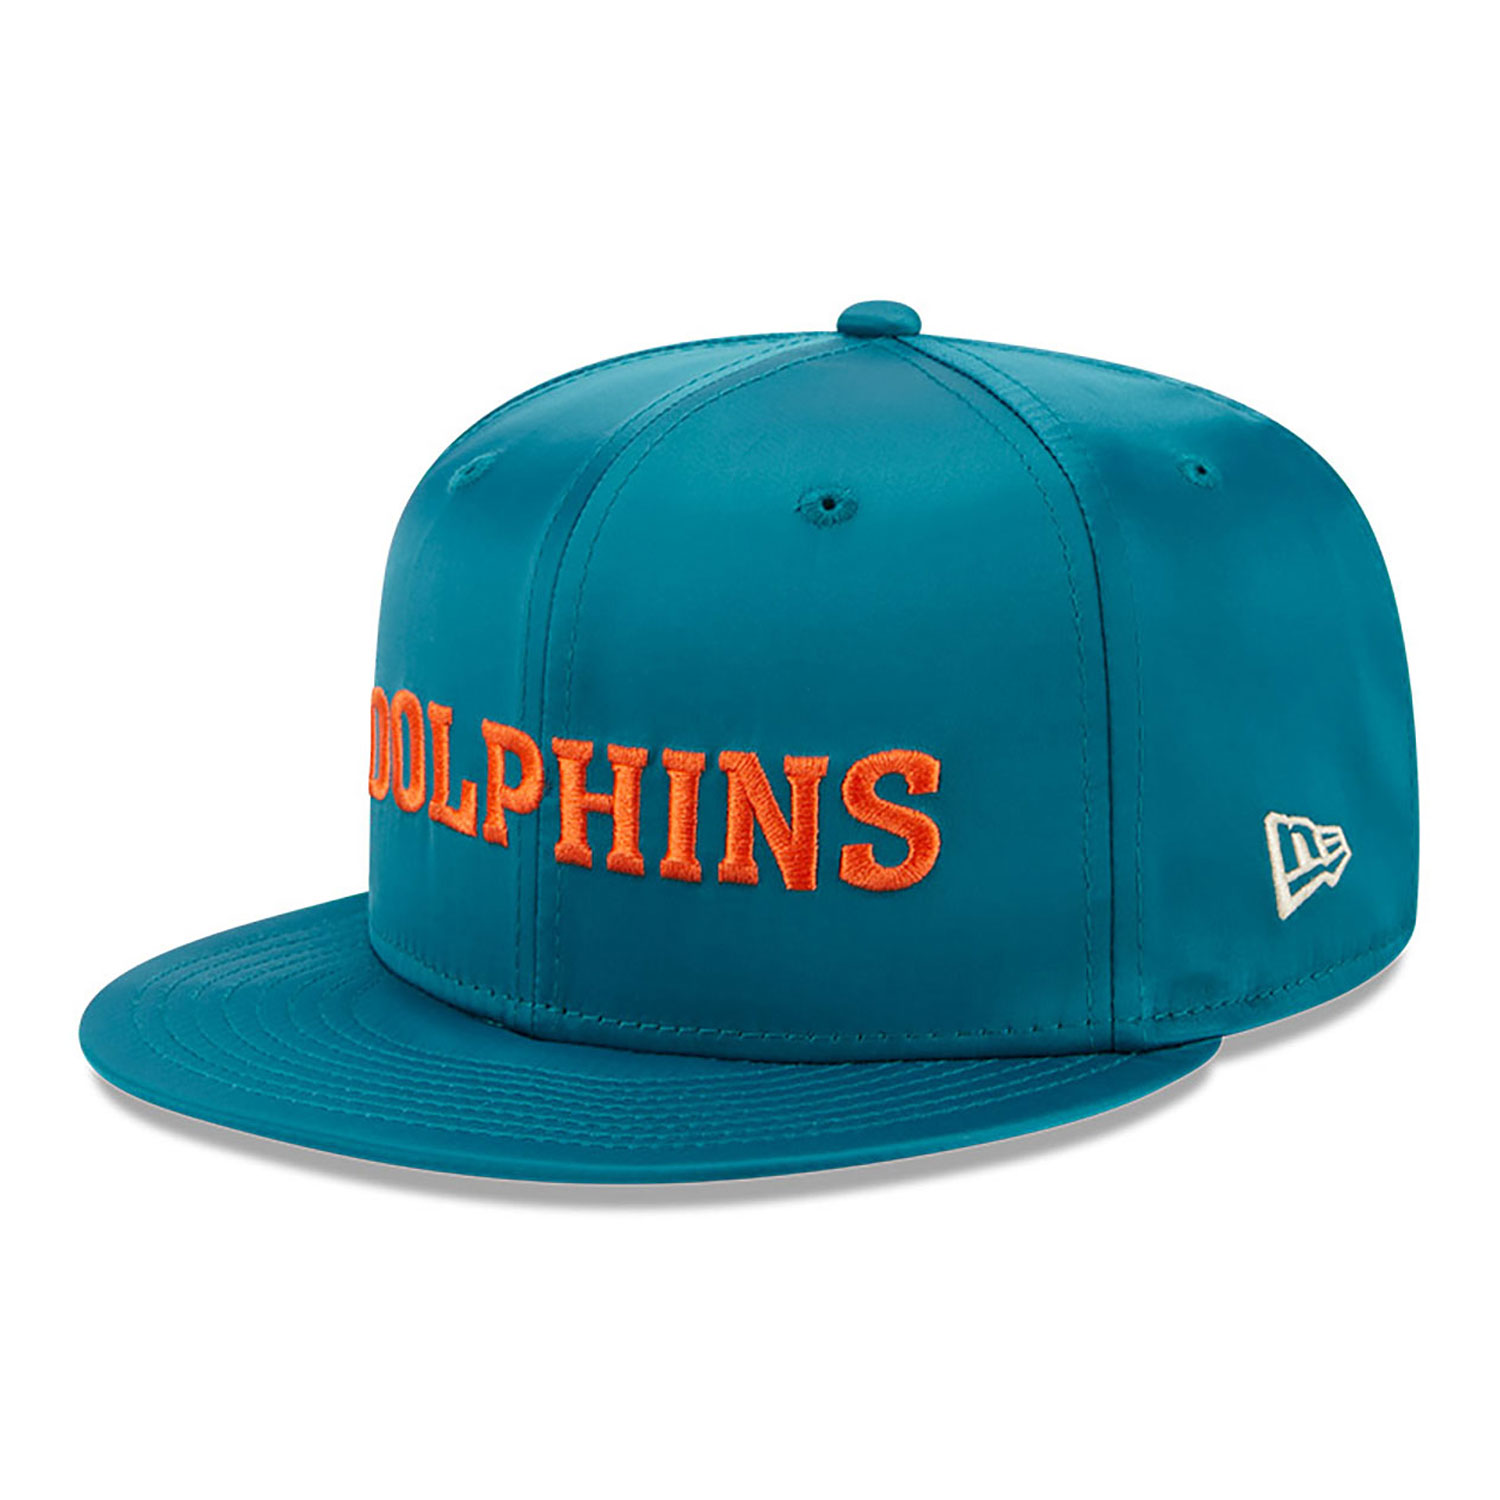 Miami Dolphins Satin Script Turquoise 9FIFTY Snapback Cap